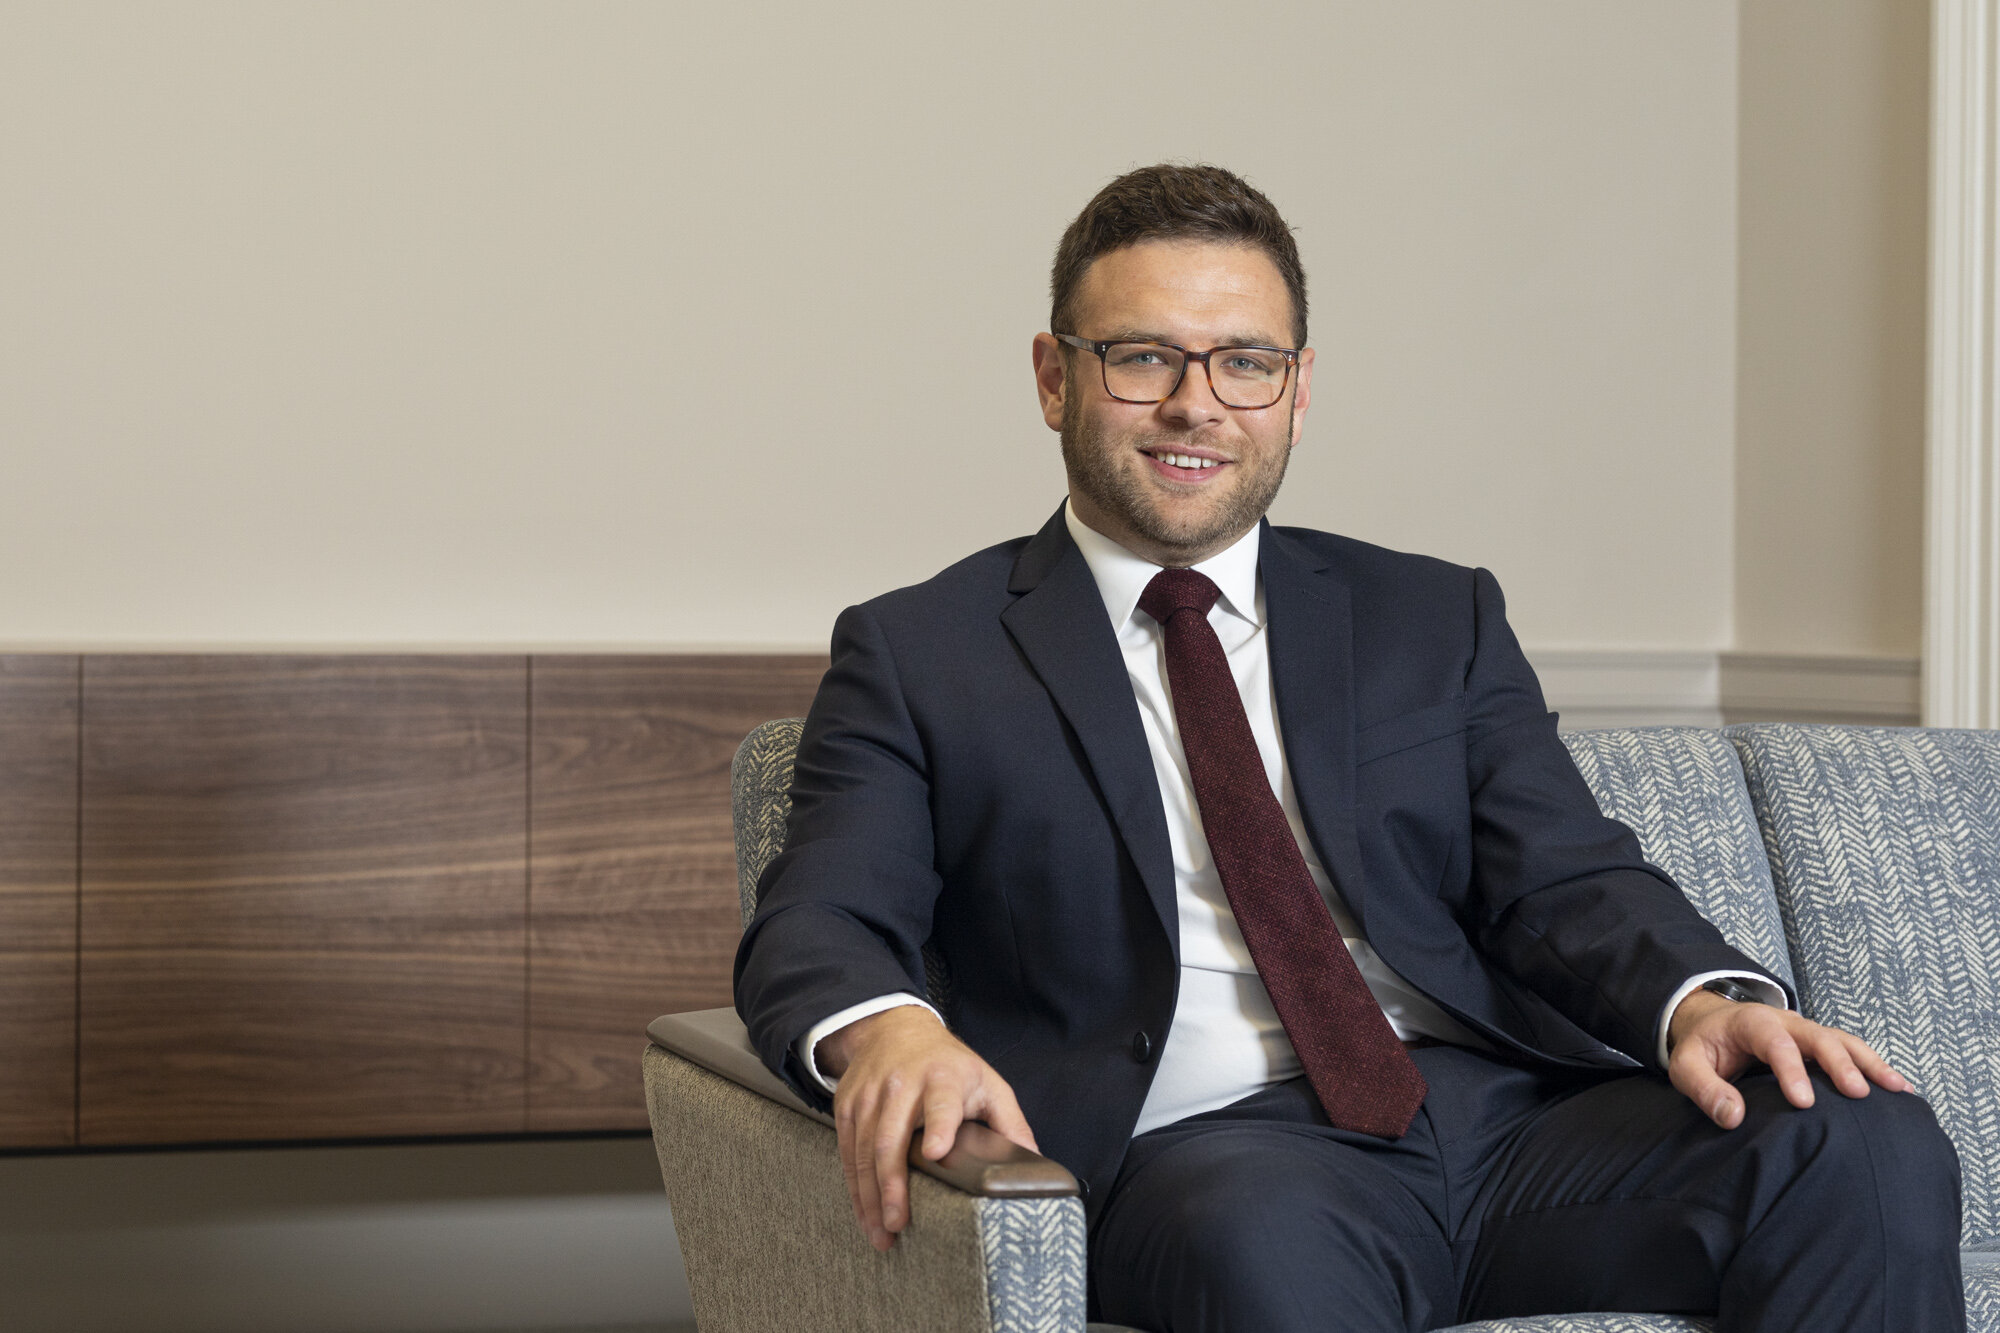  David Coutts joins the Moray Group as Head of Family Law 